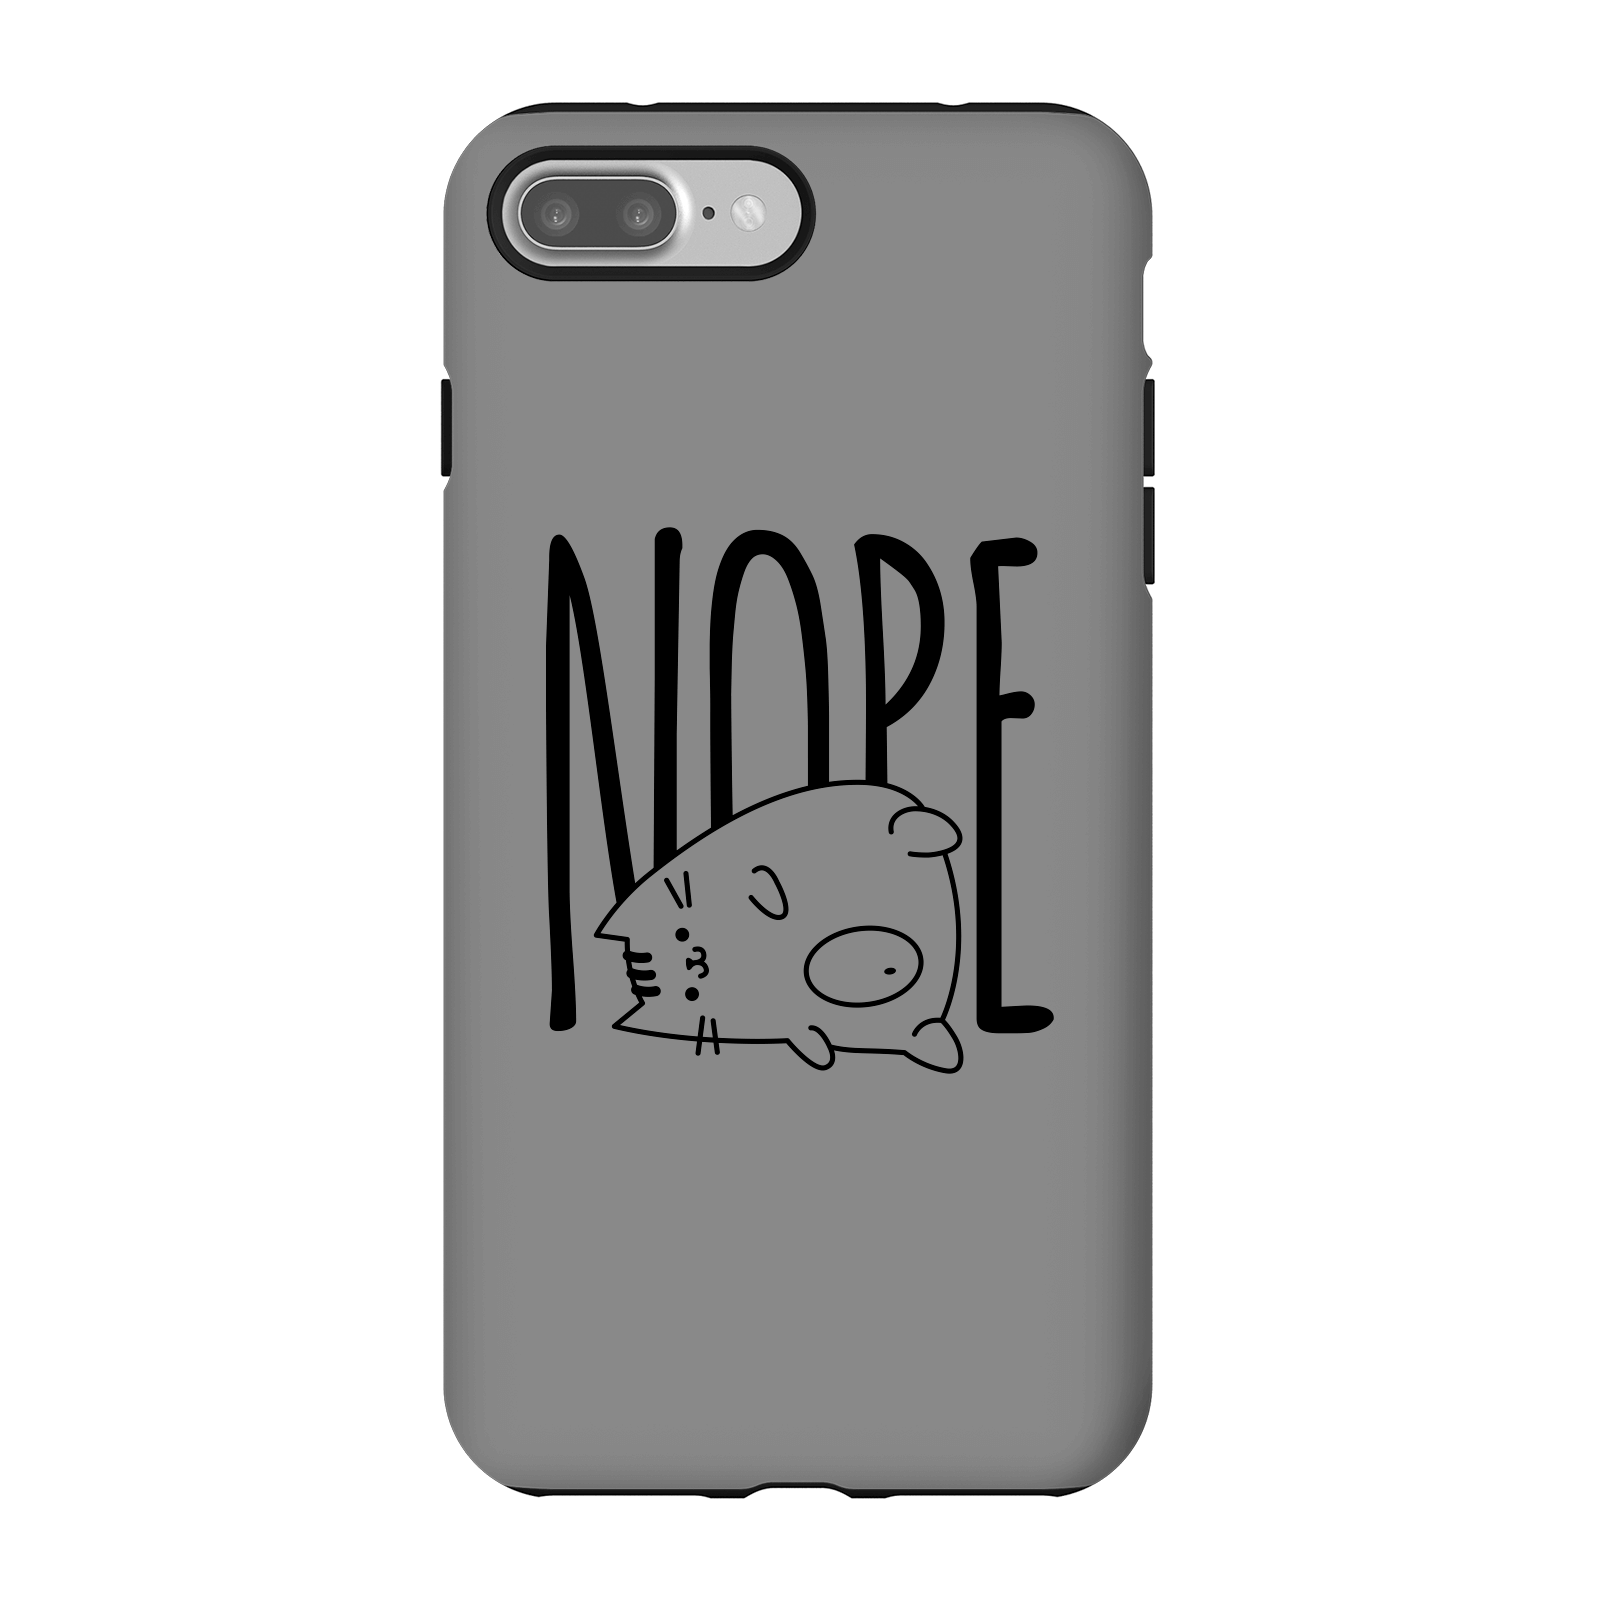 Nope Phone Case for iPhone and Android - iPhone 7 Plus - Tough Case - Matte